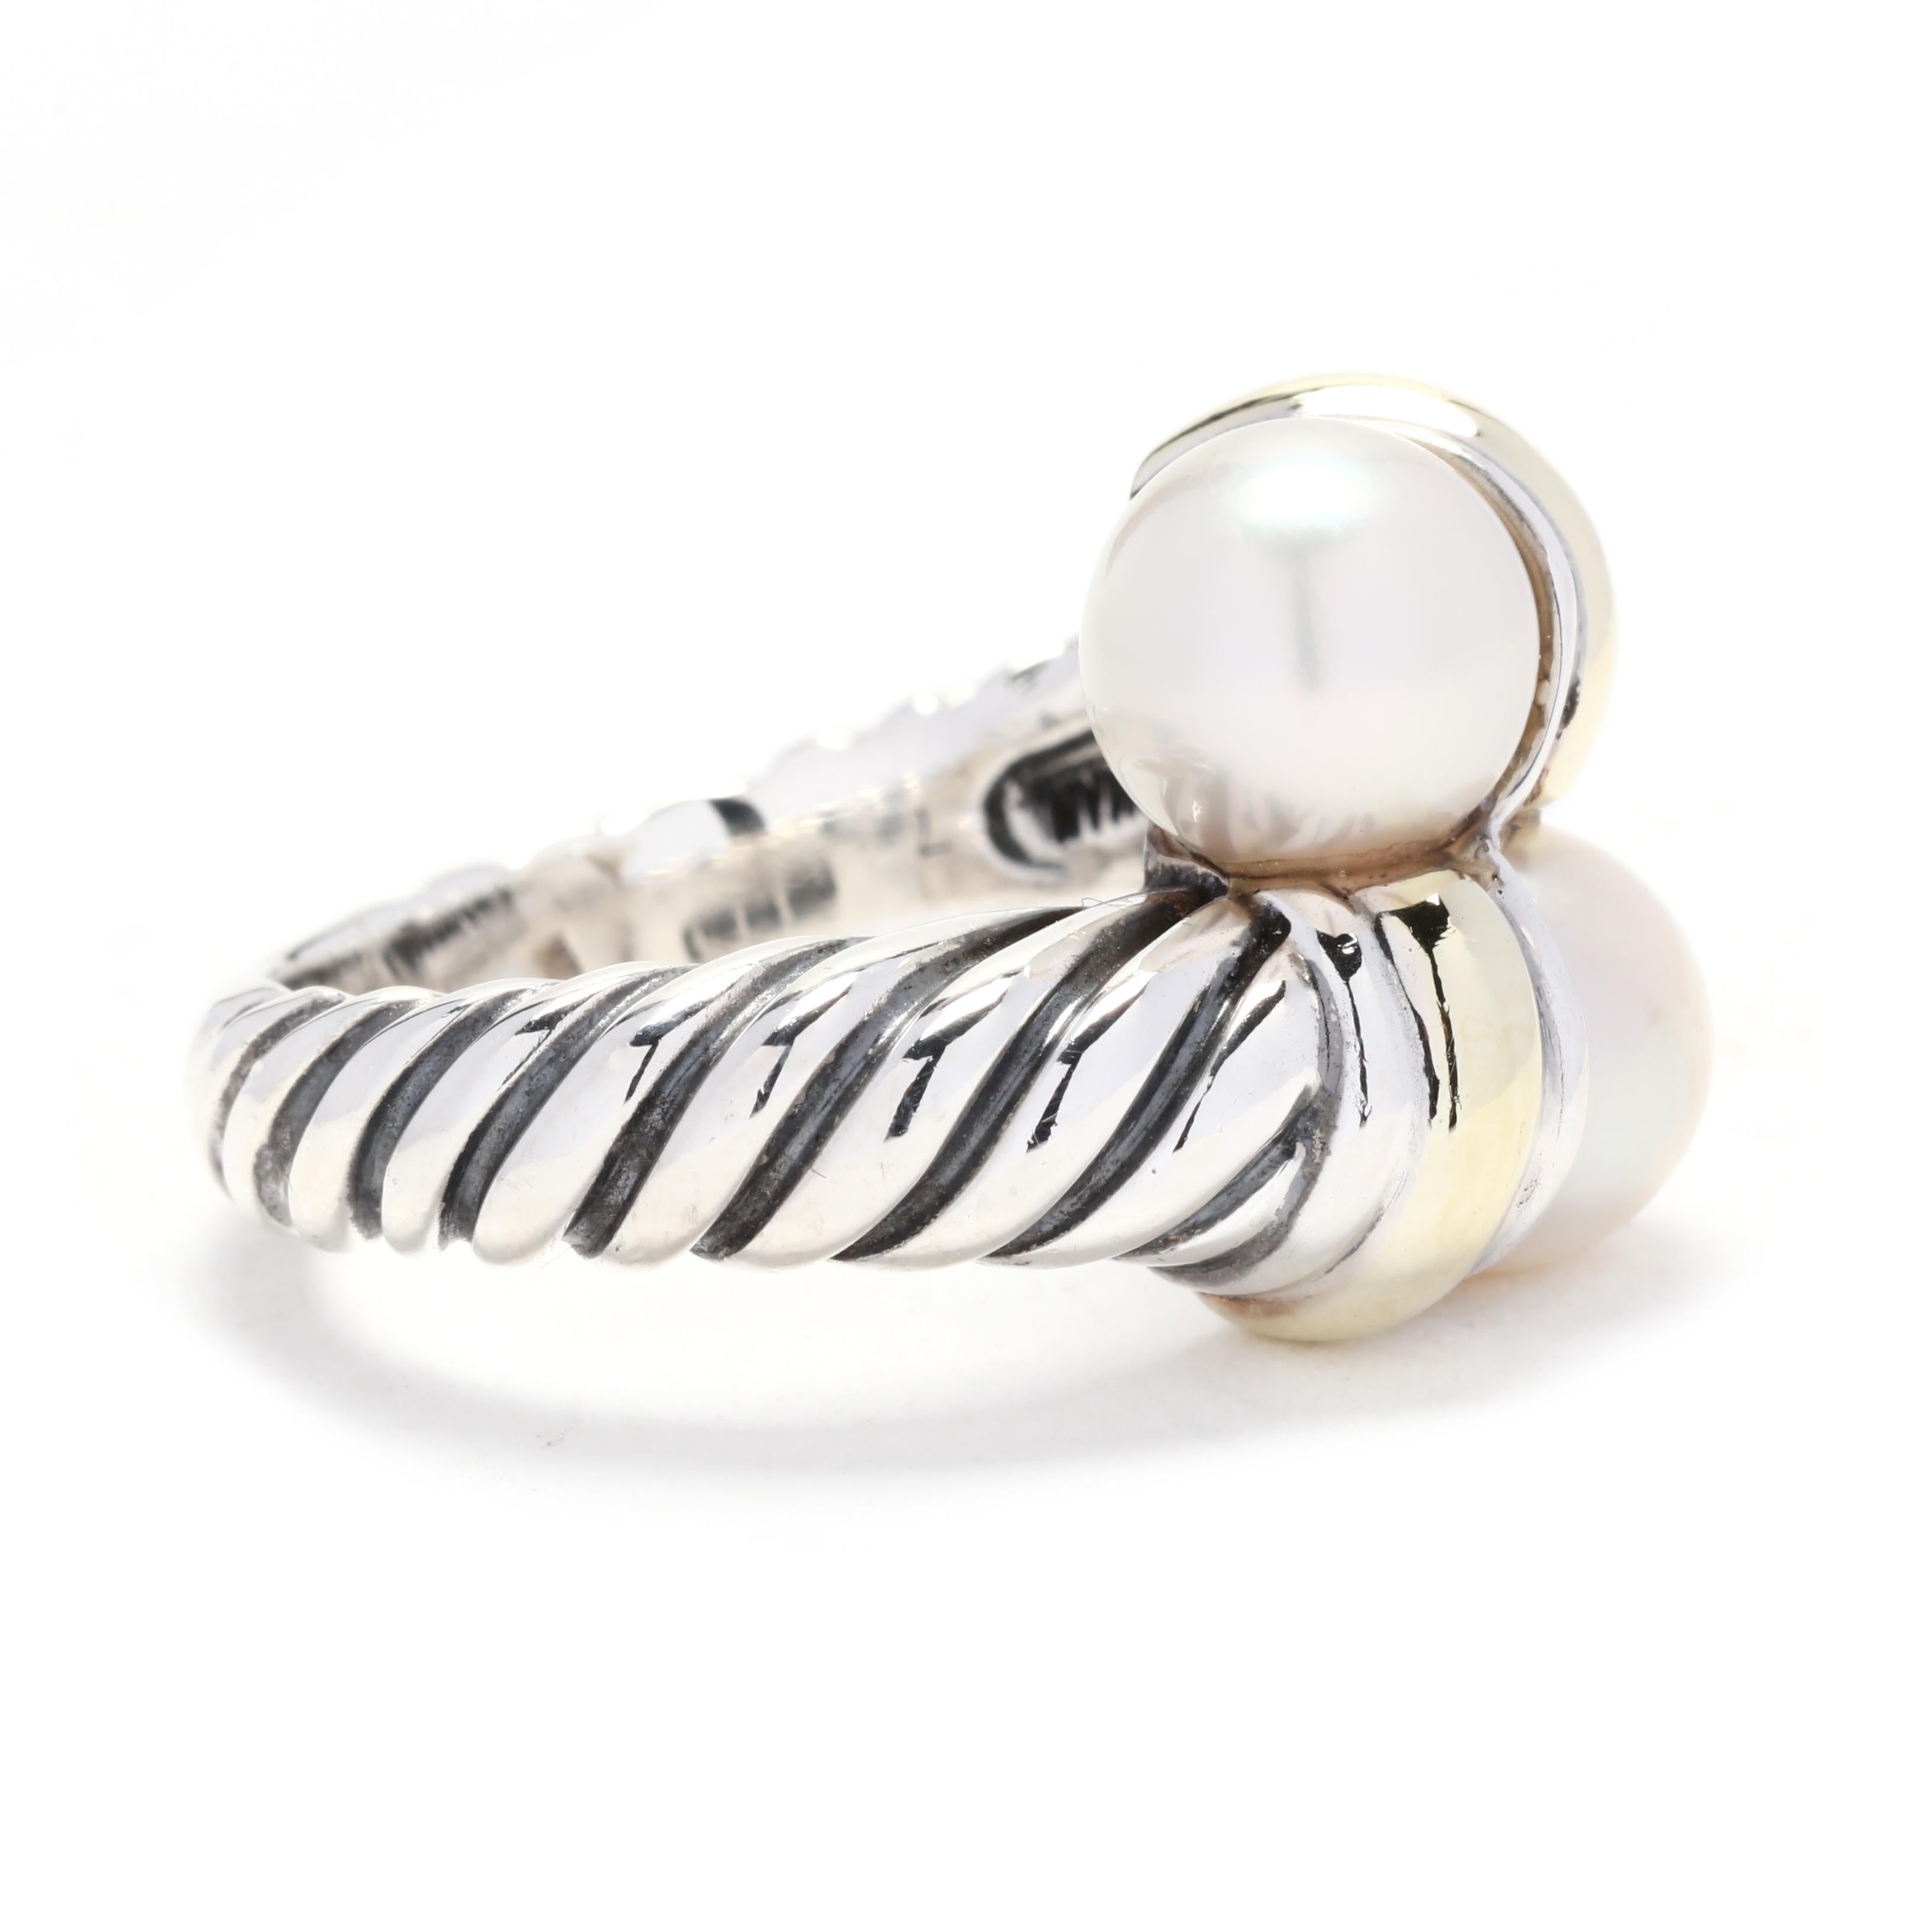 This David Yurman Cable Classics Two Pearl Crossover Ring is a stunning and elegant piece of jewelry. Made with 14K yellow gold and sterling silver, this ring features two beautiful pearls that crossover each other in a unique and eye-catching